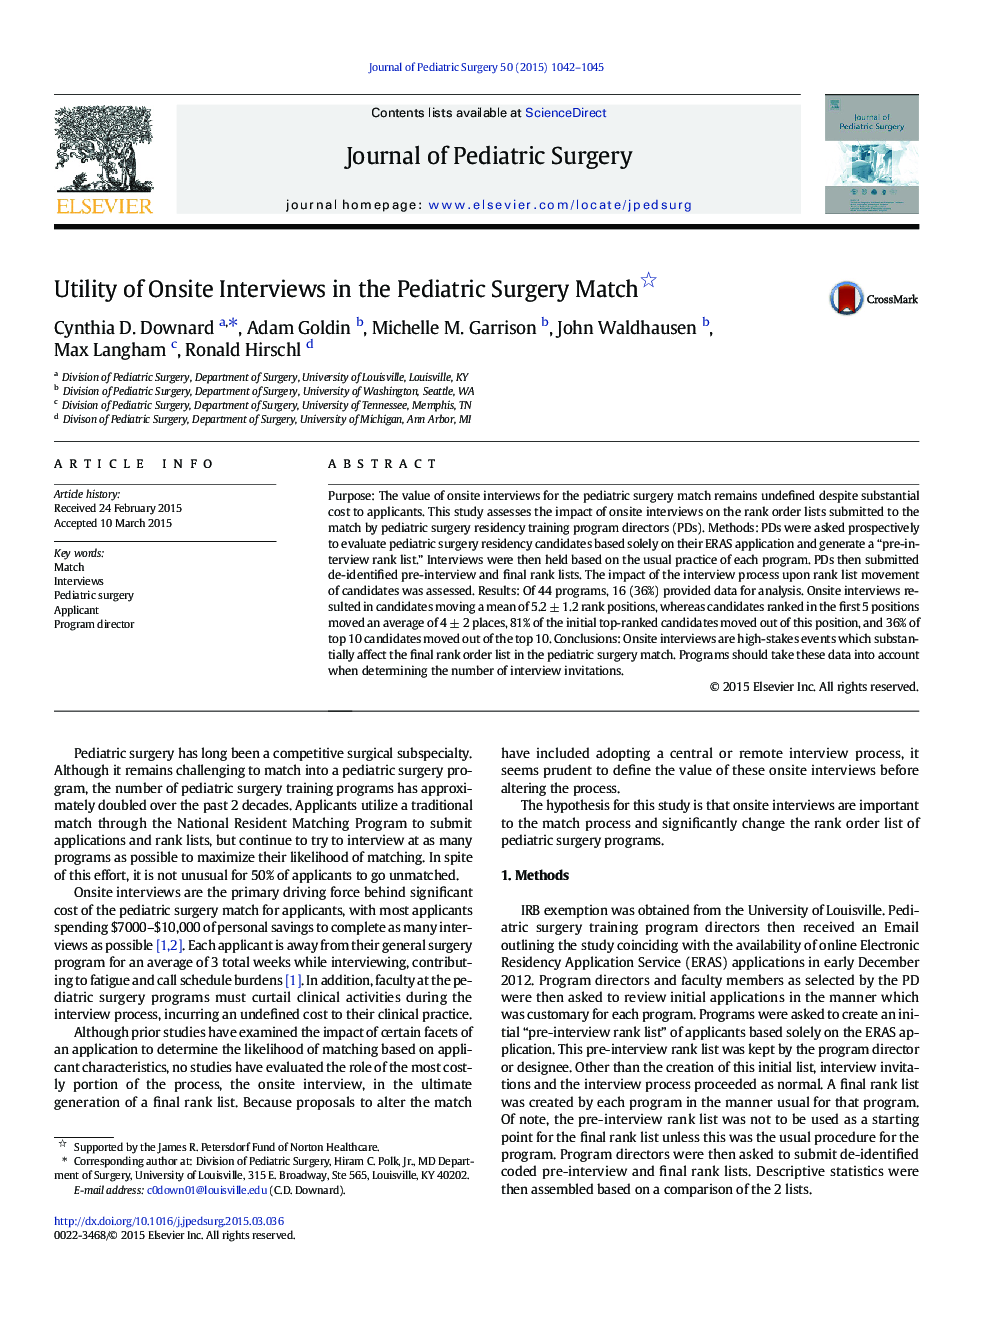 Utility of Onsite Interviews in the Pediatric Surgery Match 